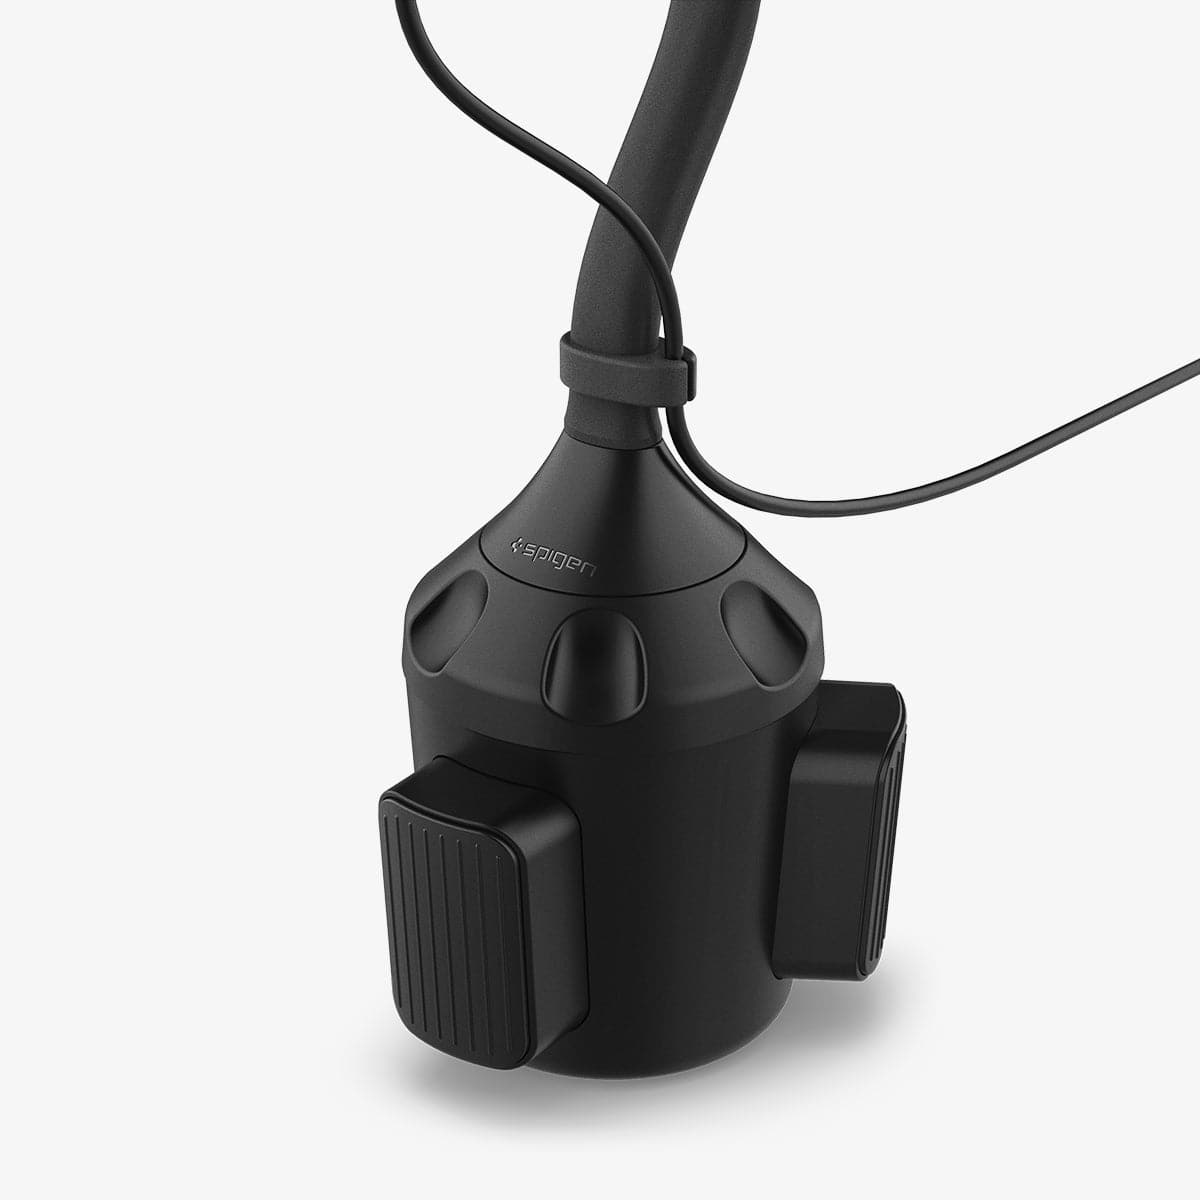 ACP03810 - OneTap Pro Wireless Car Mount Cup Holder (MagFit) in black showing the bottom cup holder portion of mount